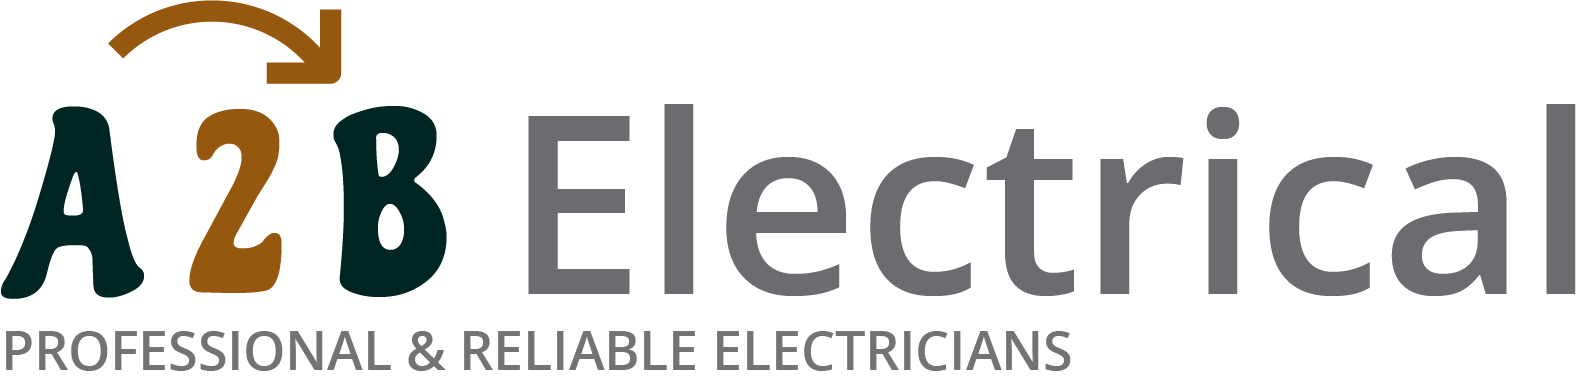 If you have electrical wiring problems in Shirebrook, we can provide an electrician to have a look for you. 